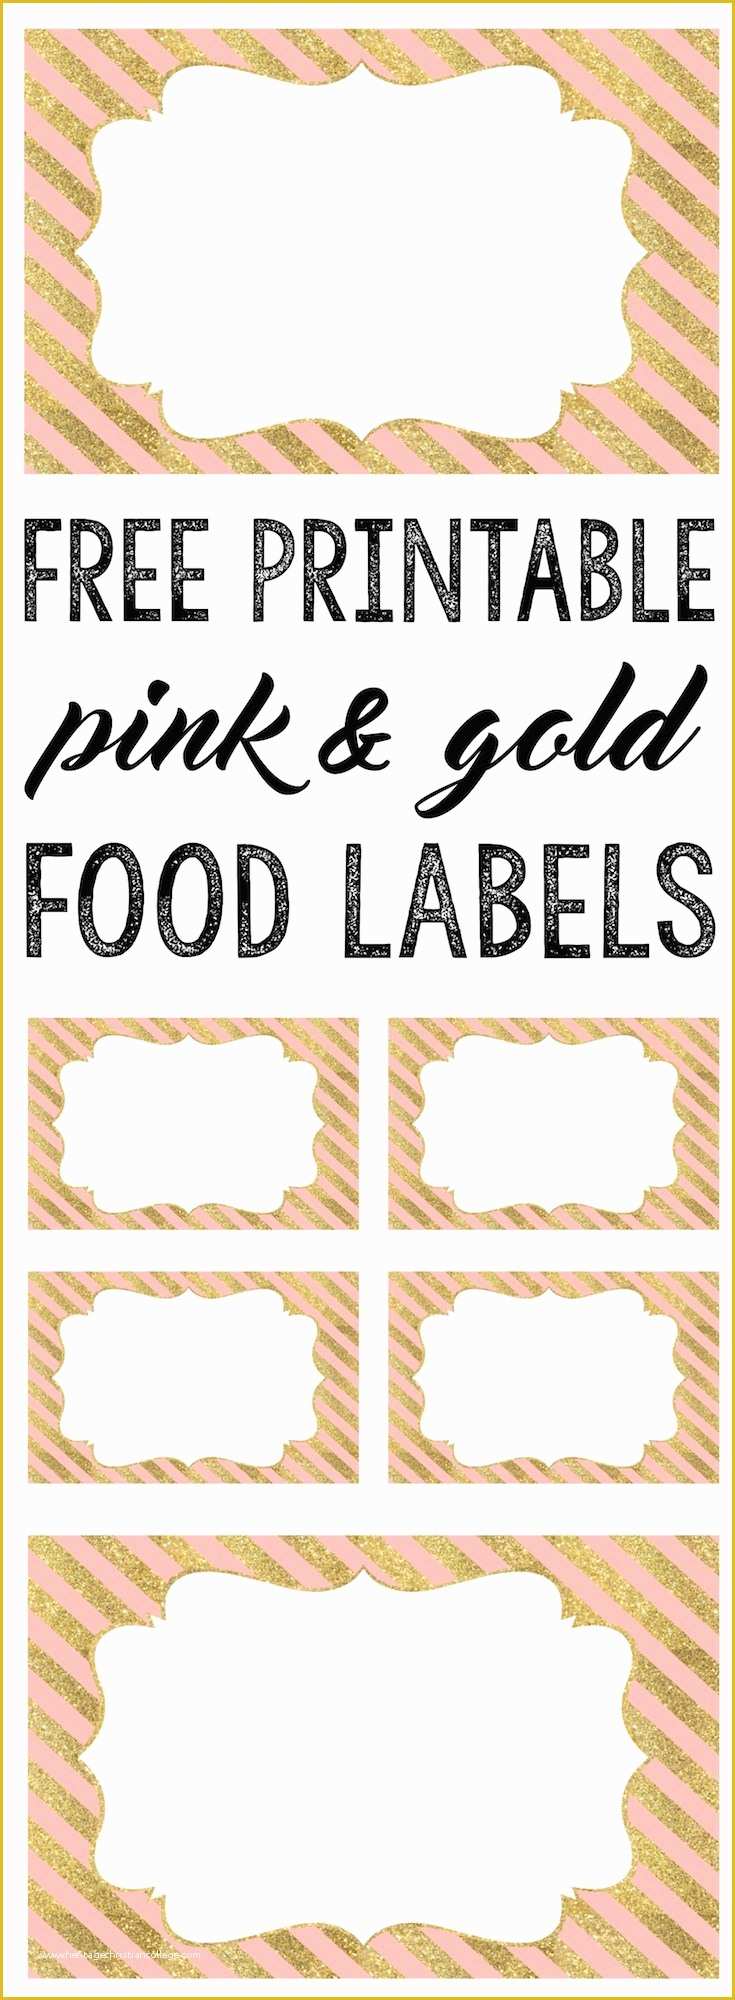 Free Printable Food Labels Templates Of Pink and Gold Food Labels Free Printable Paper Trail Design